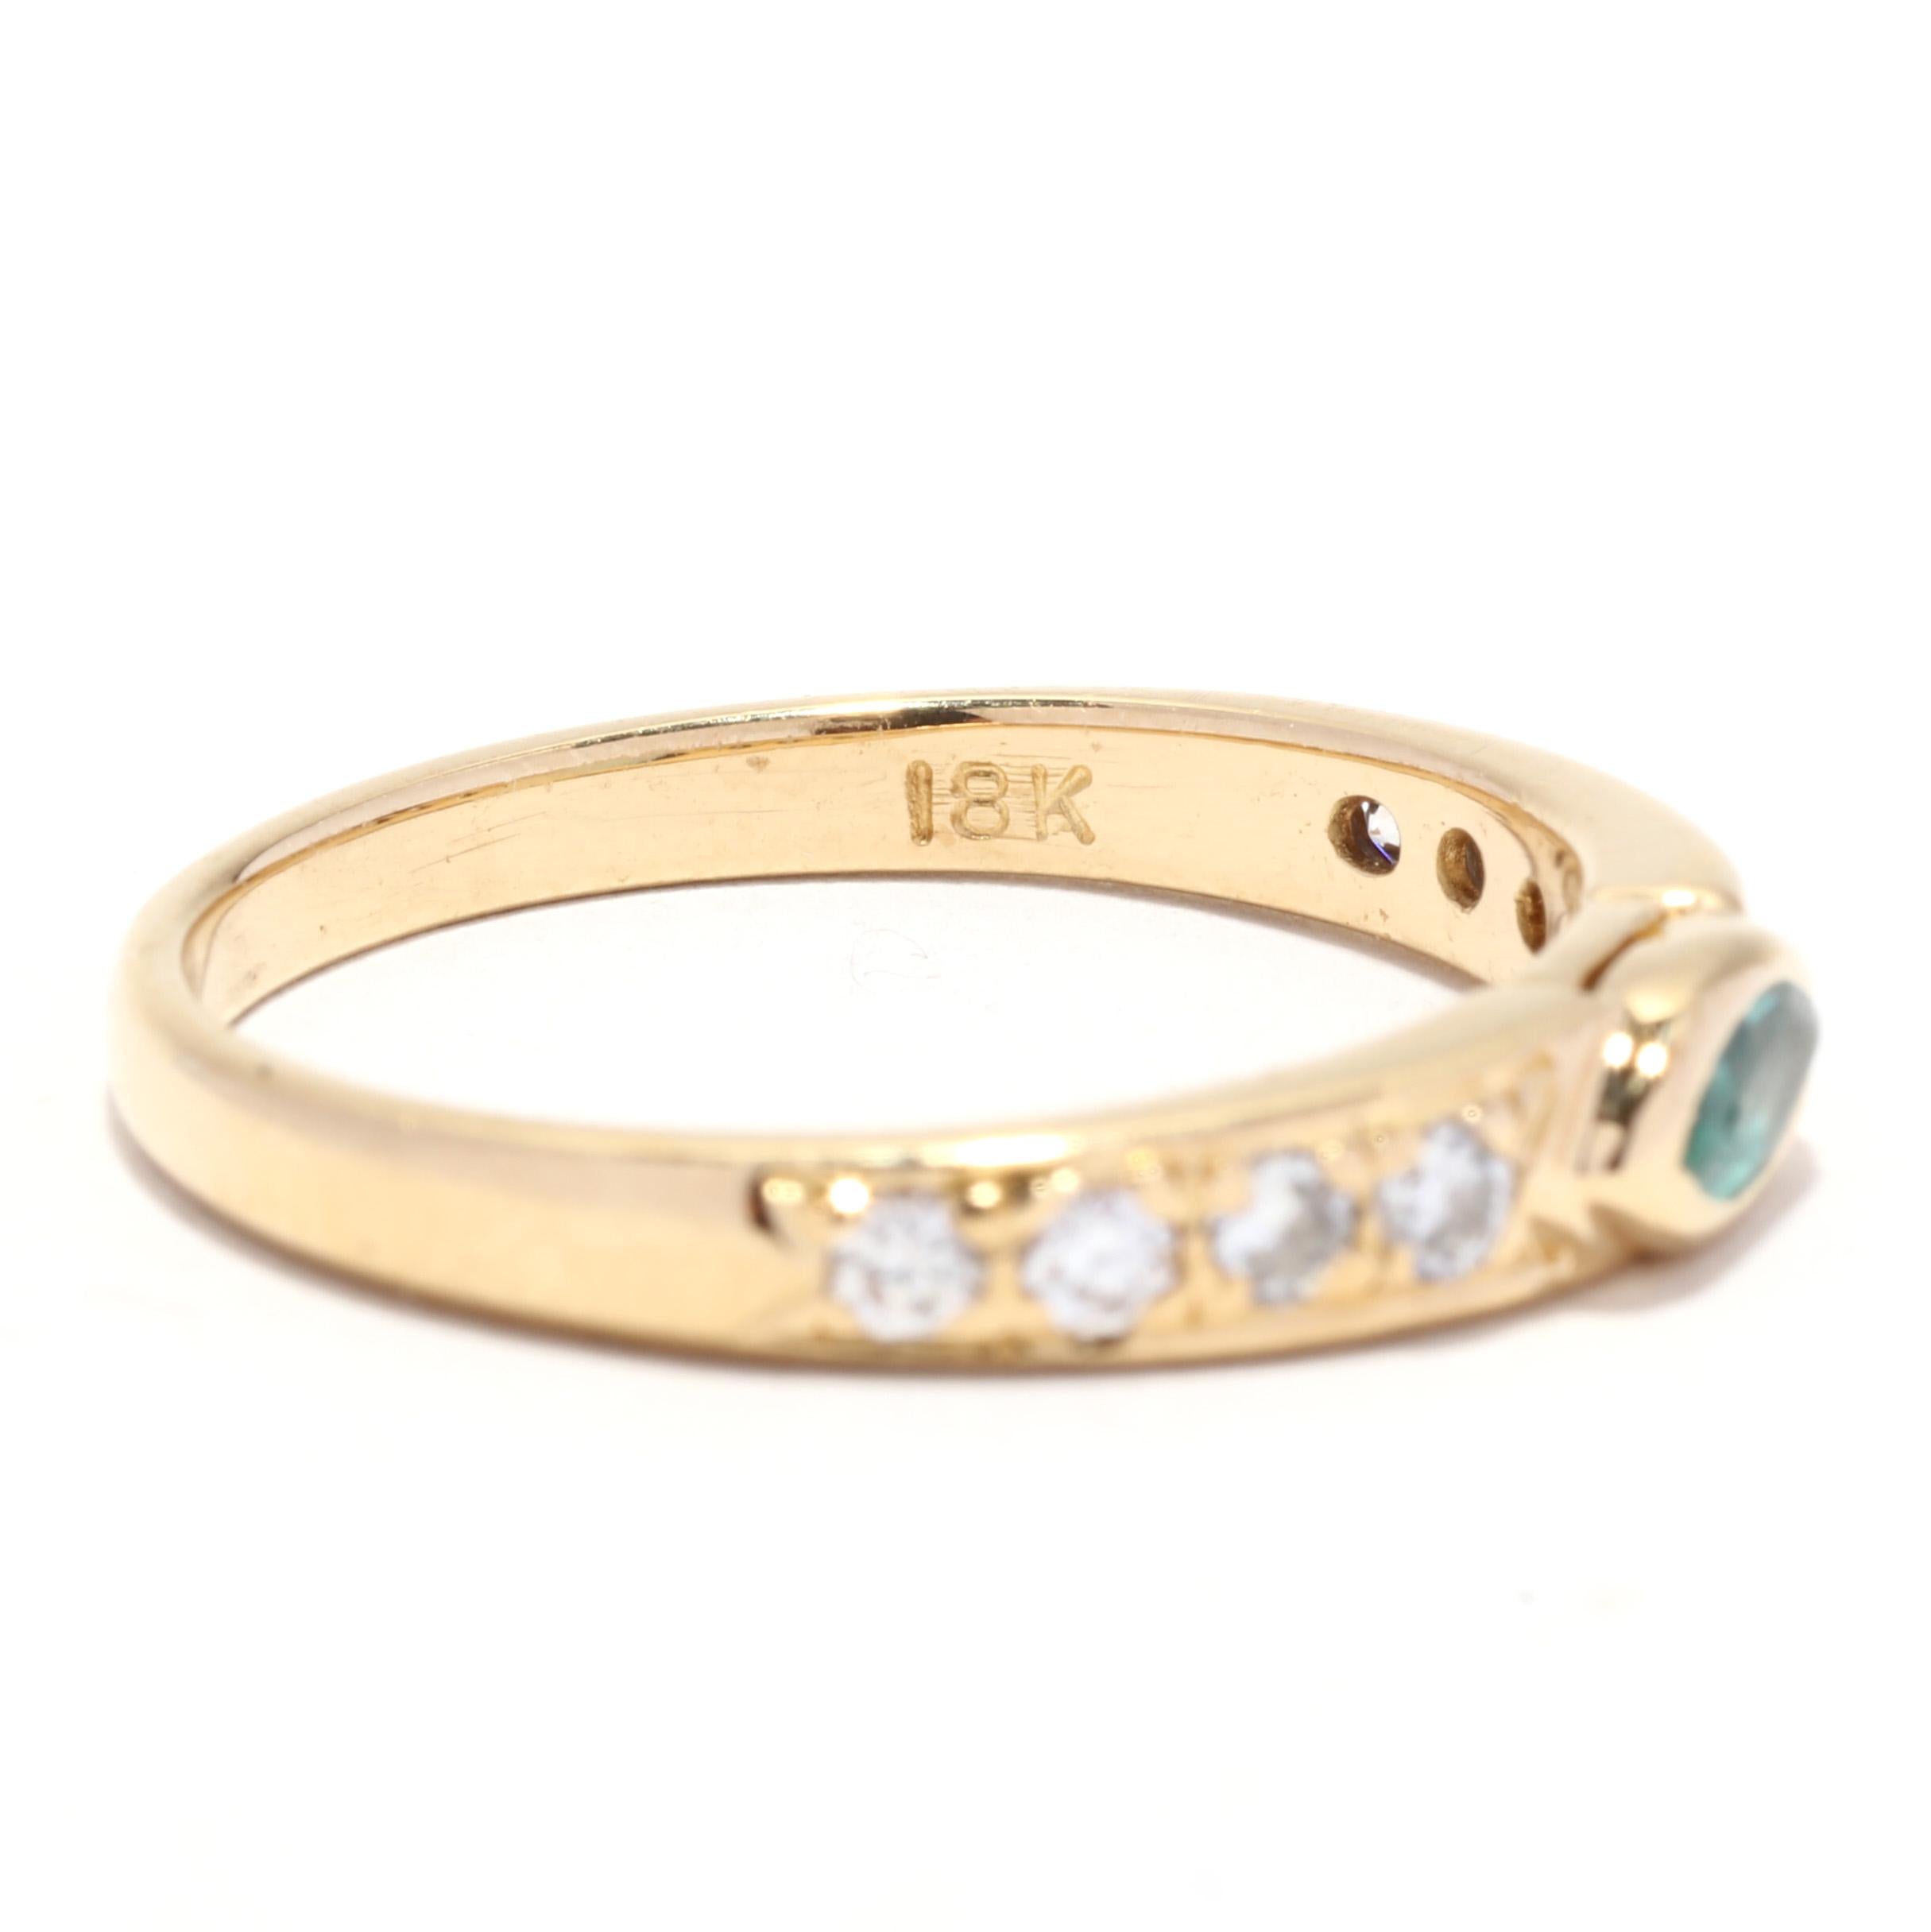 Women's or Men's Tourmaline Diamond Stackable Band Ring, 18KT Yellow Gold, Ring